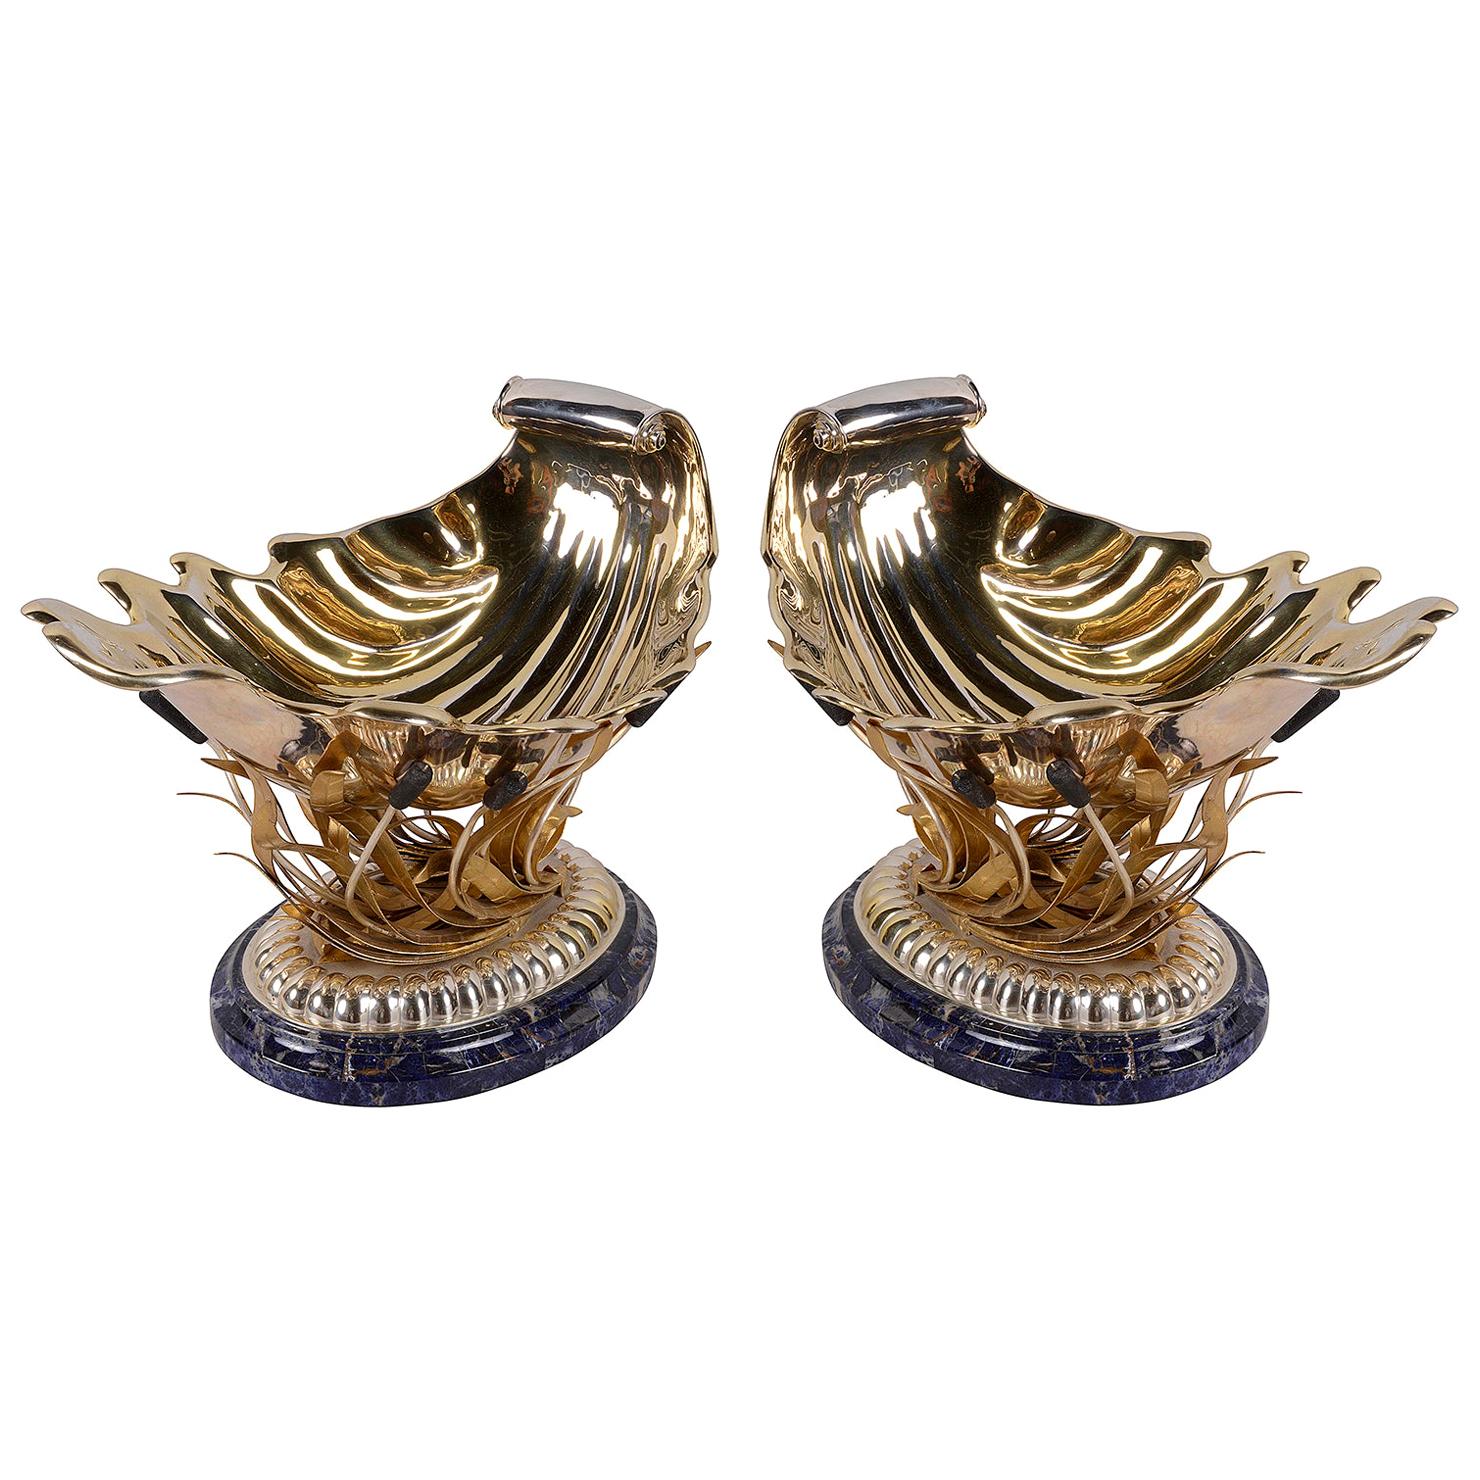 Pair of Silver Gilt and Hard Stone Jardinieres, by Mappin & Webb